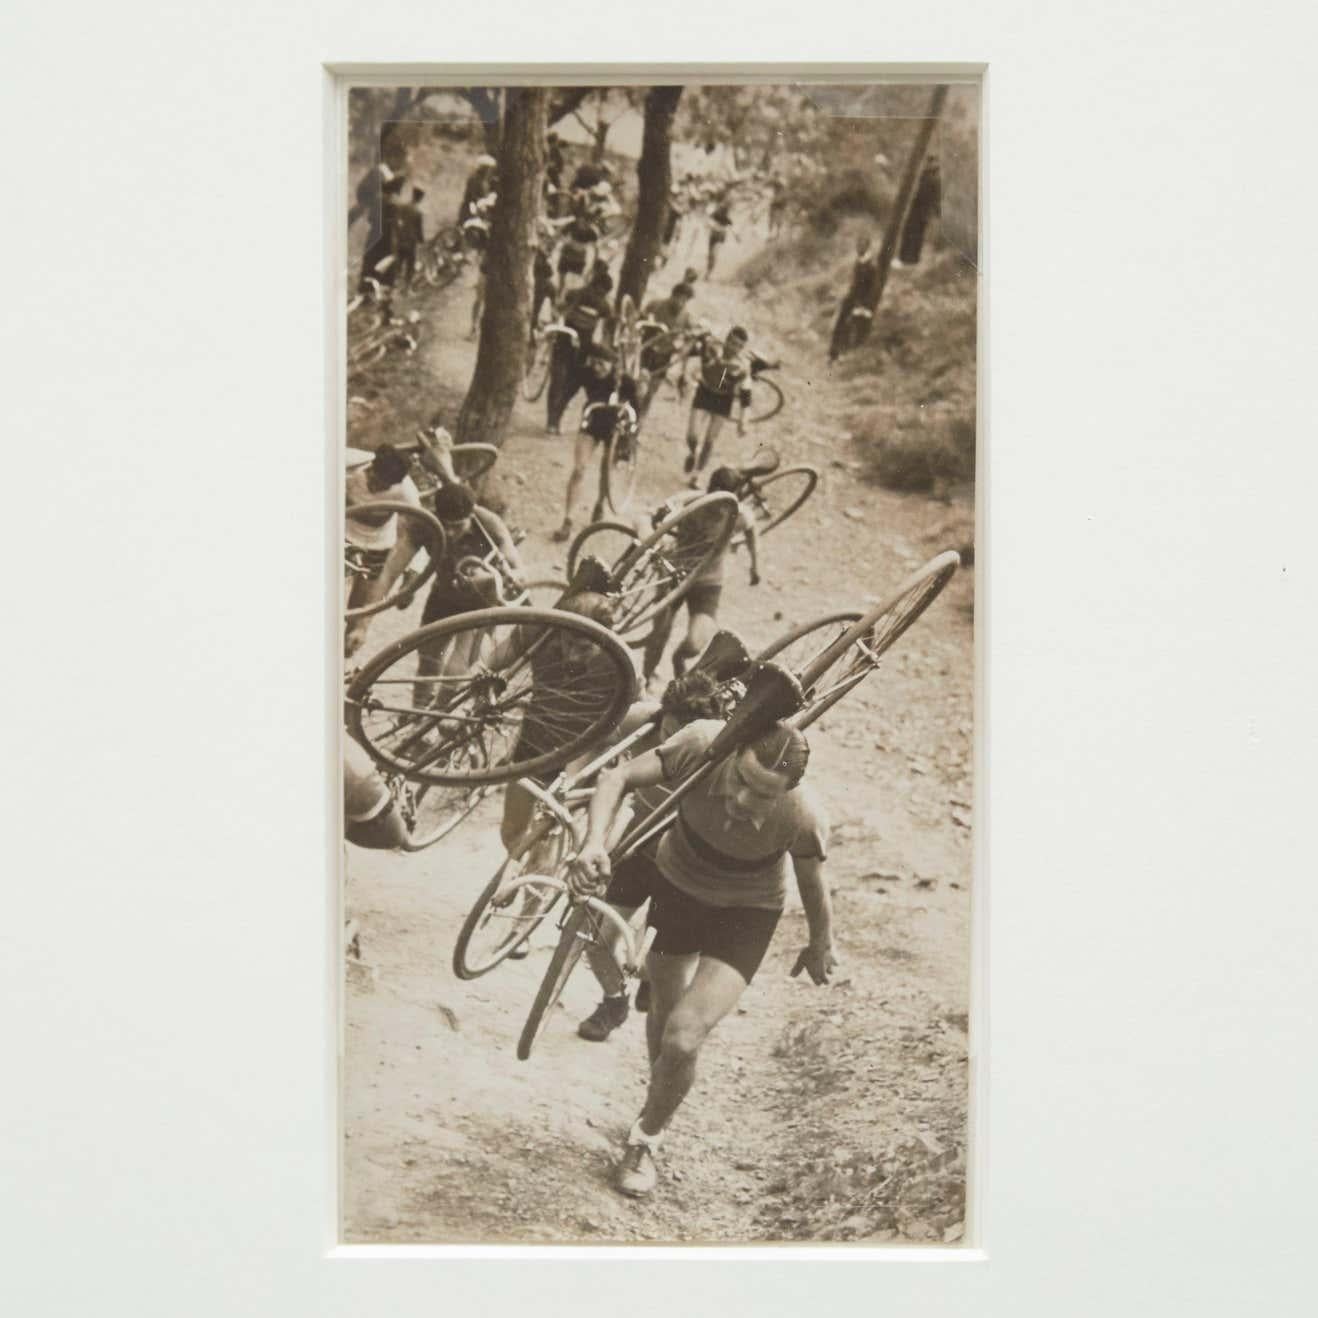 Photography by Agusti Centellas, circa 1920

Gelatin silver print.
Stamp in the back.

Agustí Centelles Ossó (1909 in Valencia - 1 December 1985 in Barcelona) was a Catalan photographer, working on the Republican side of the Spanish Civil War.